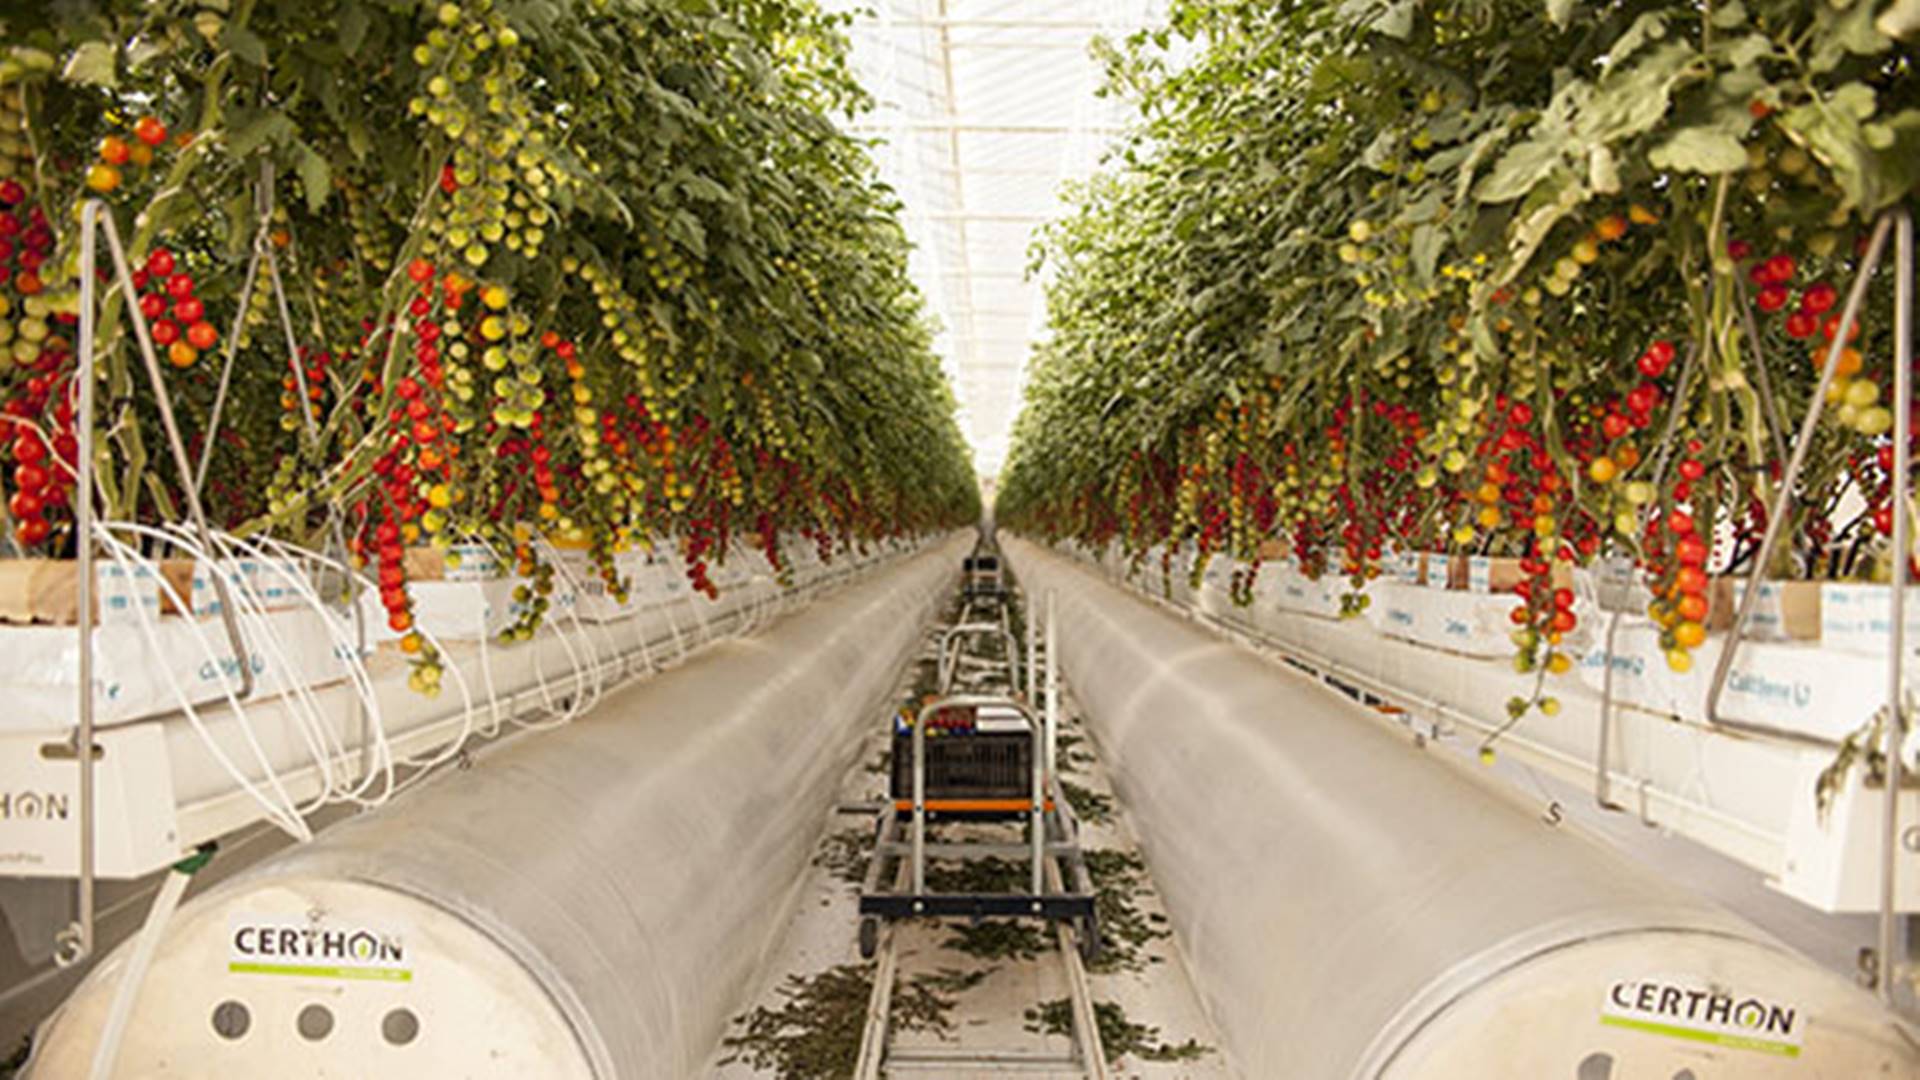 Middle East start-up that grows food within the desert raises $60 million in funding